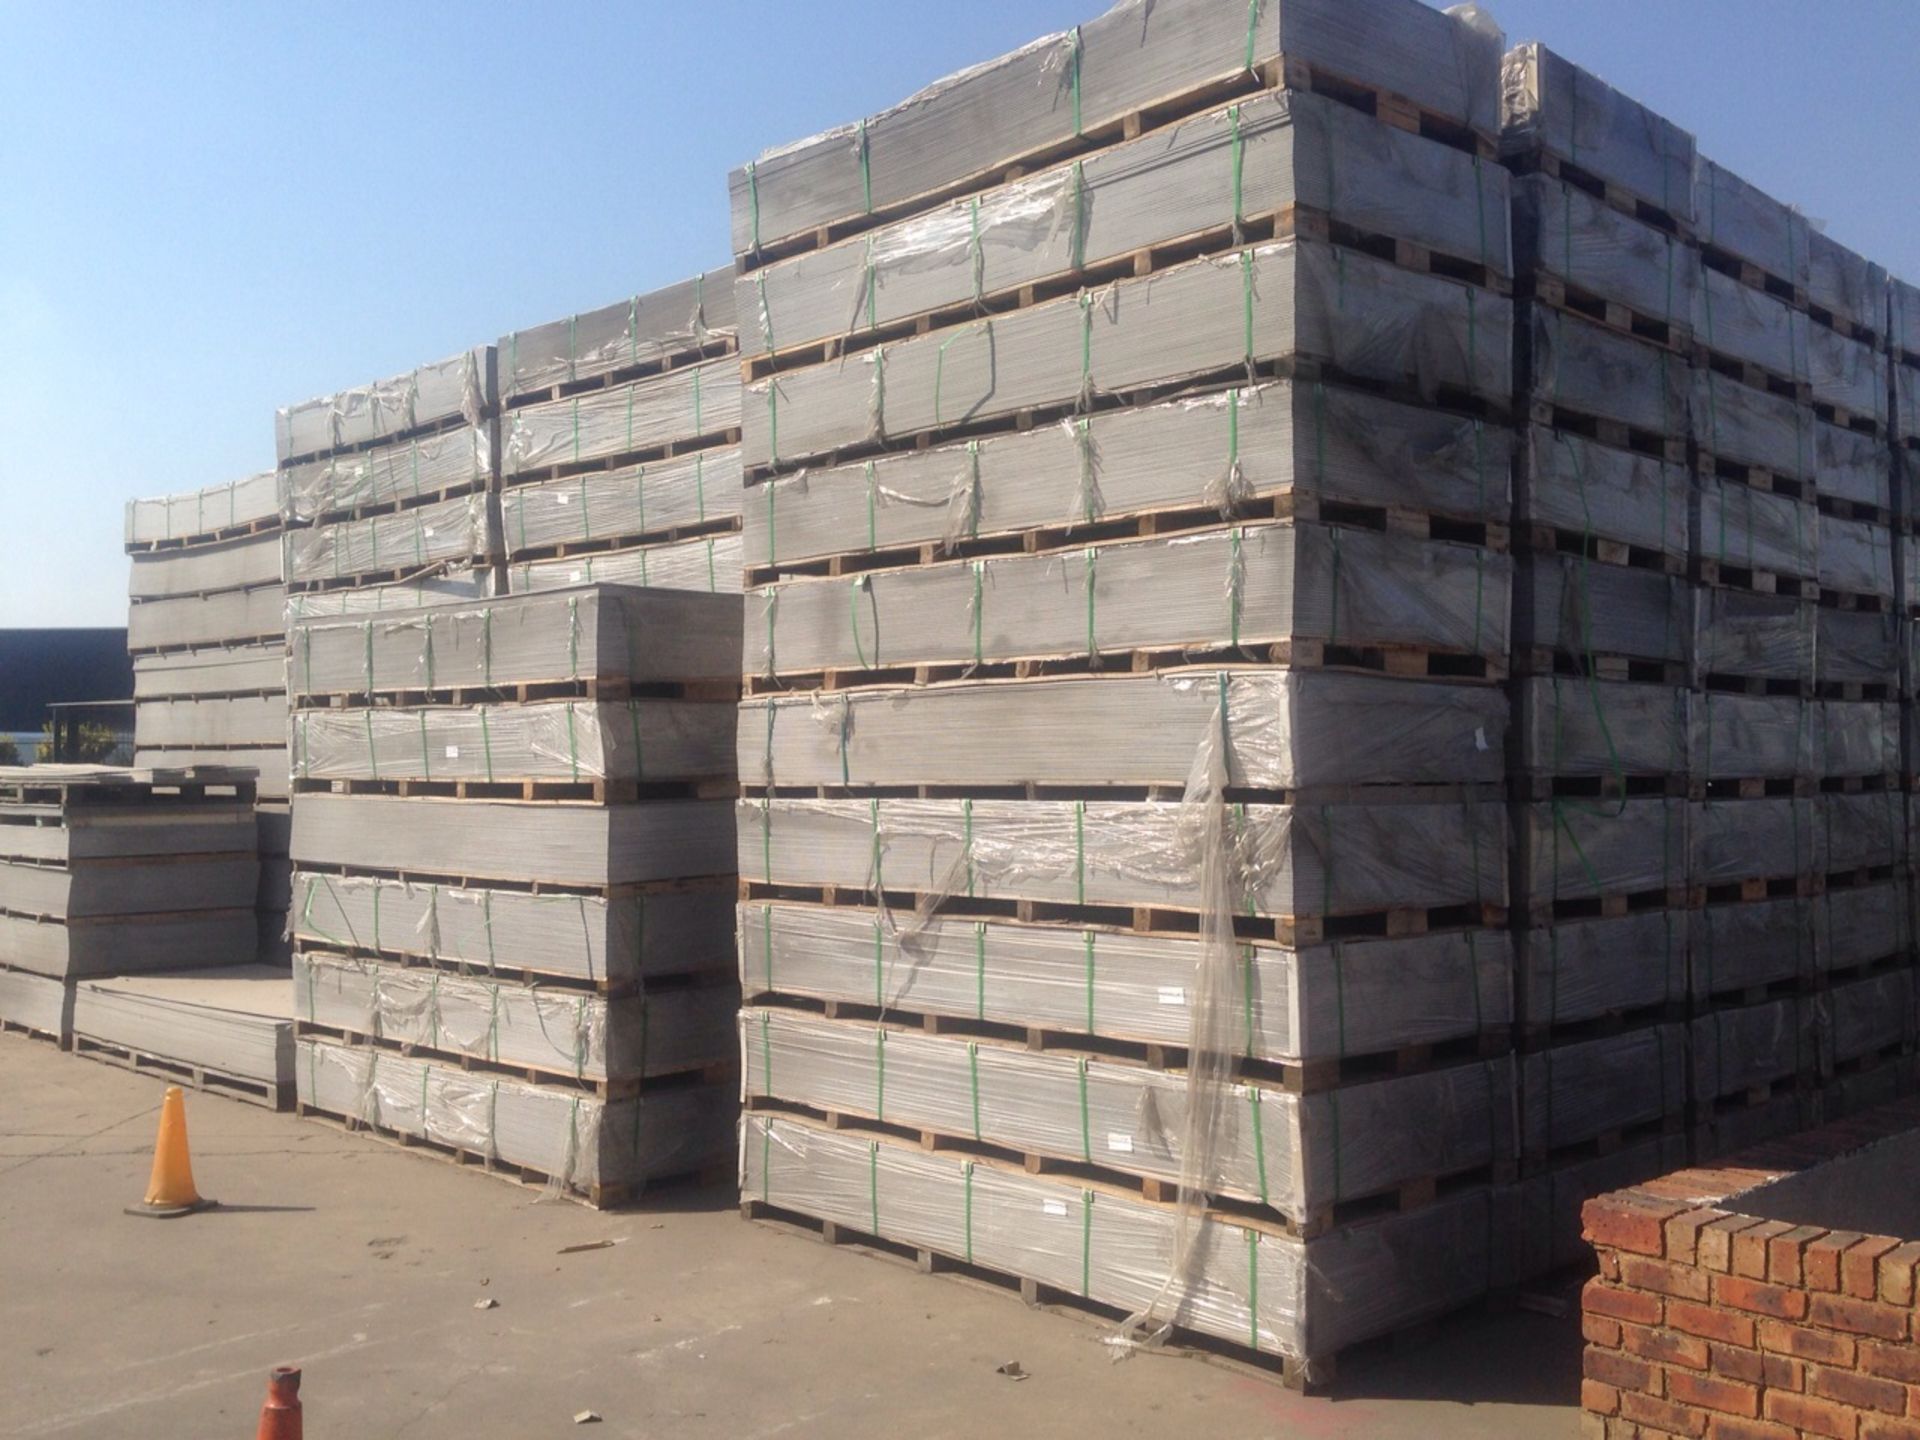 B GRADE FIBRE CEMENT BOARD 6MM TAPERED EDGE 3000 X 1200 (20 PALLETS - 50 BOARDS / PALLET) - Image 2 of 3